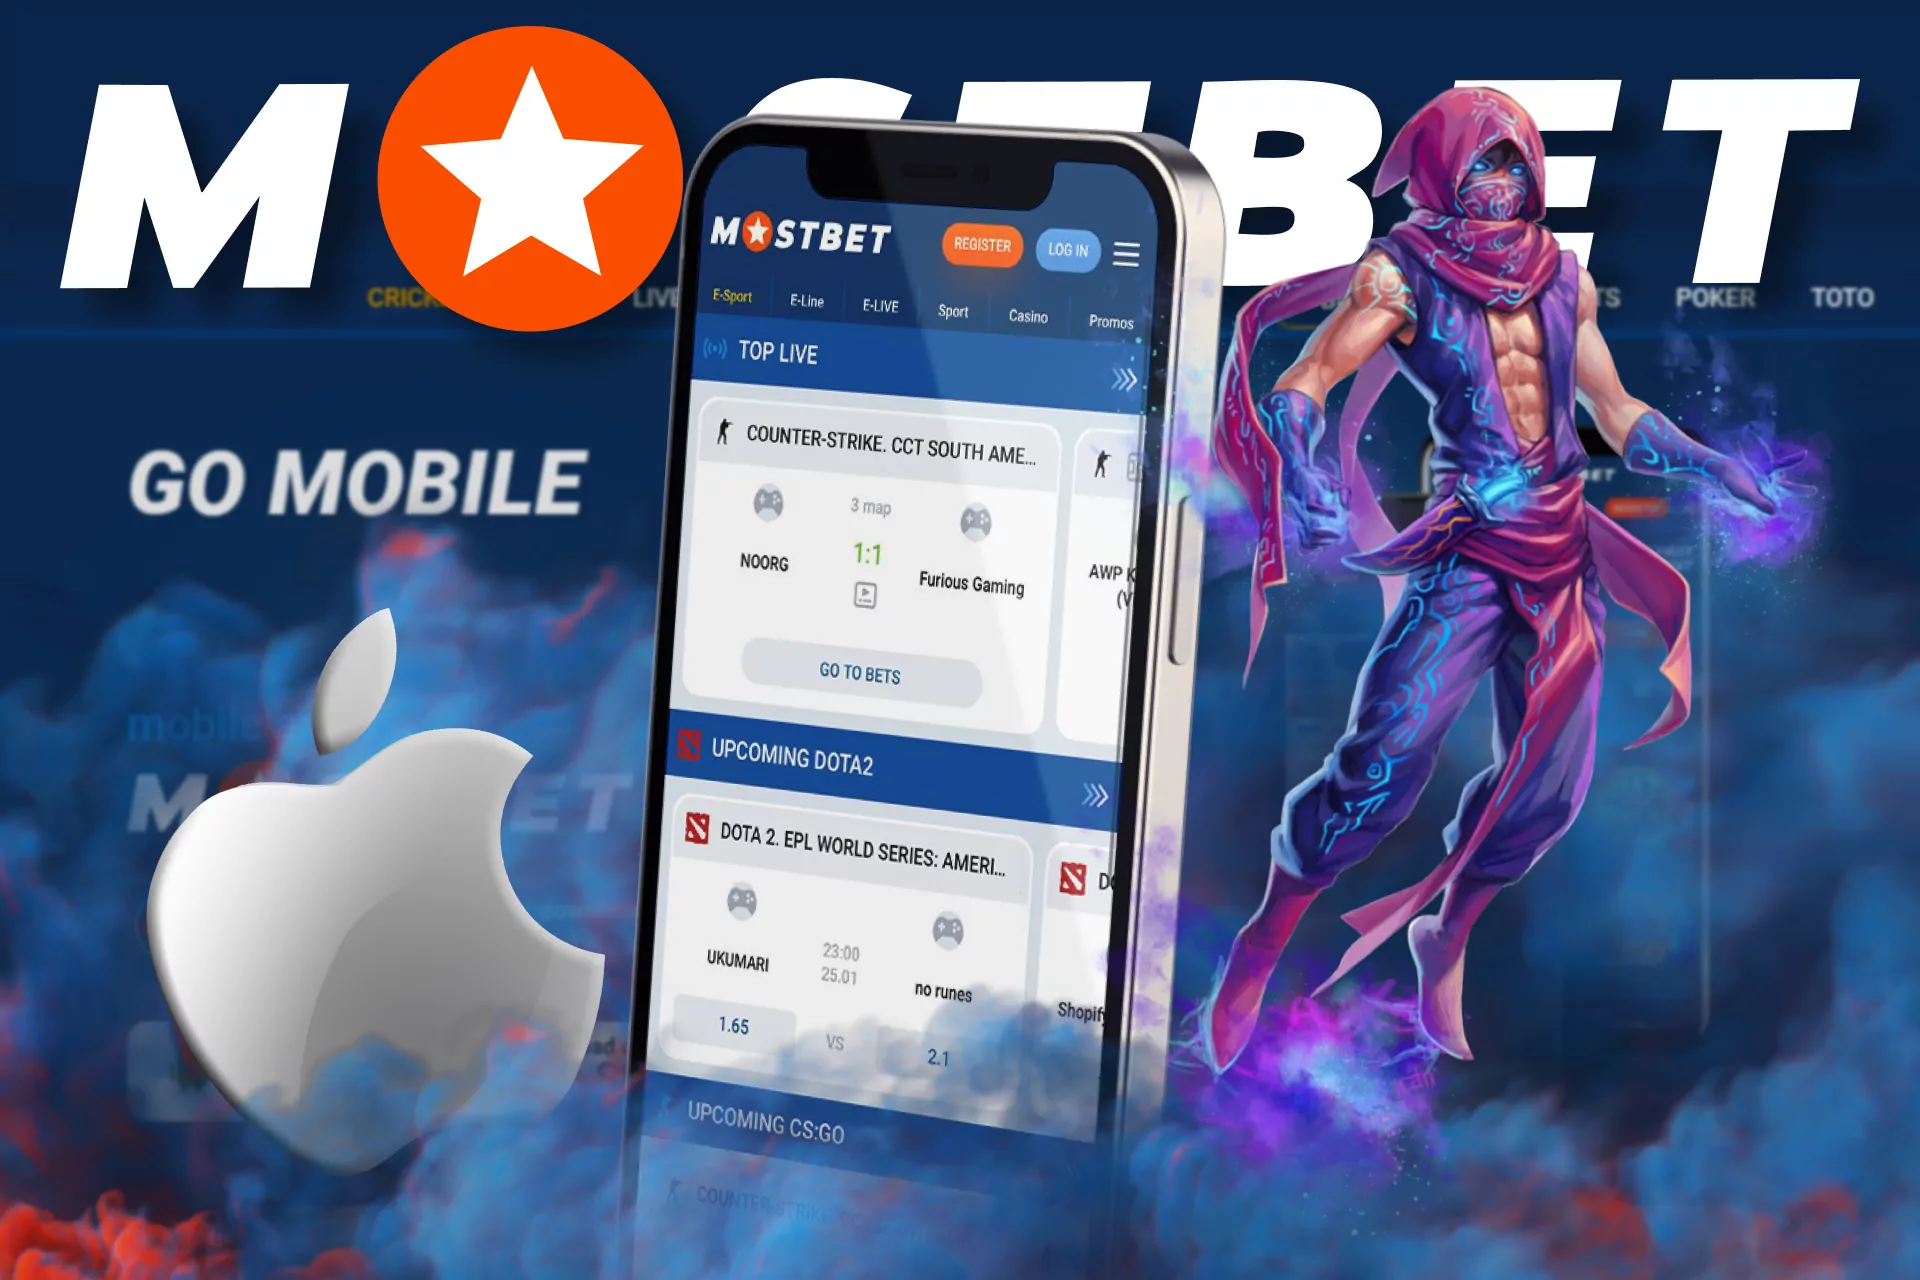 Bet on esports directly on your iOS device through the Mostbet app.